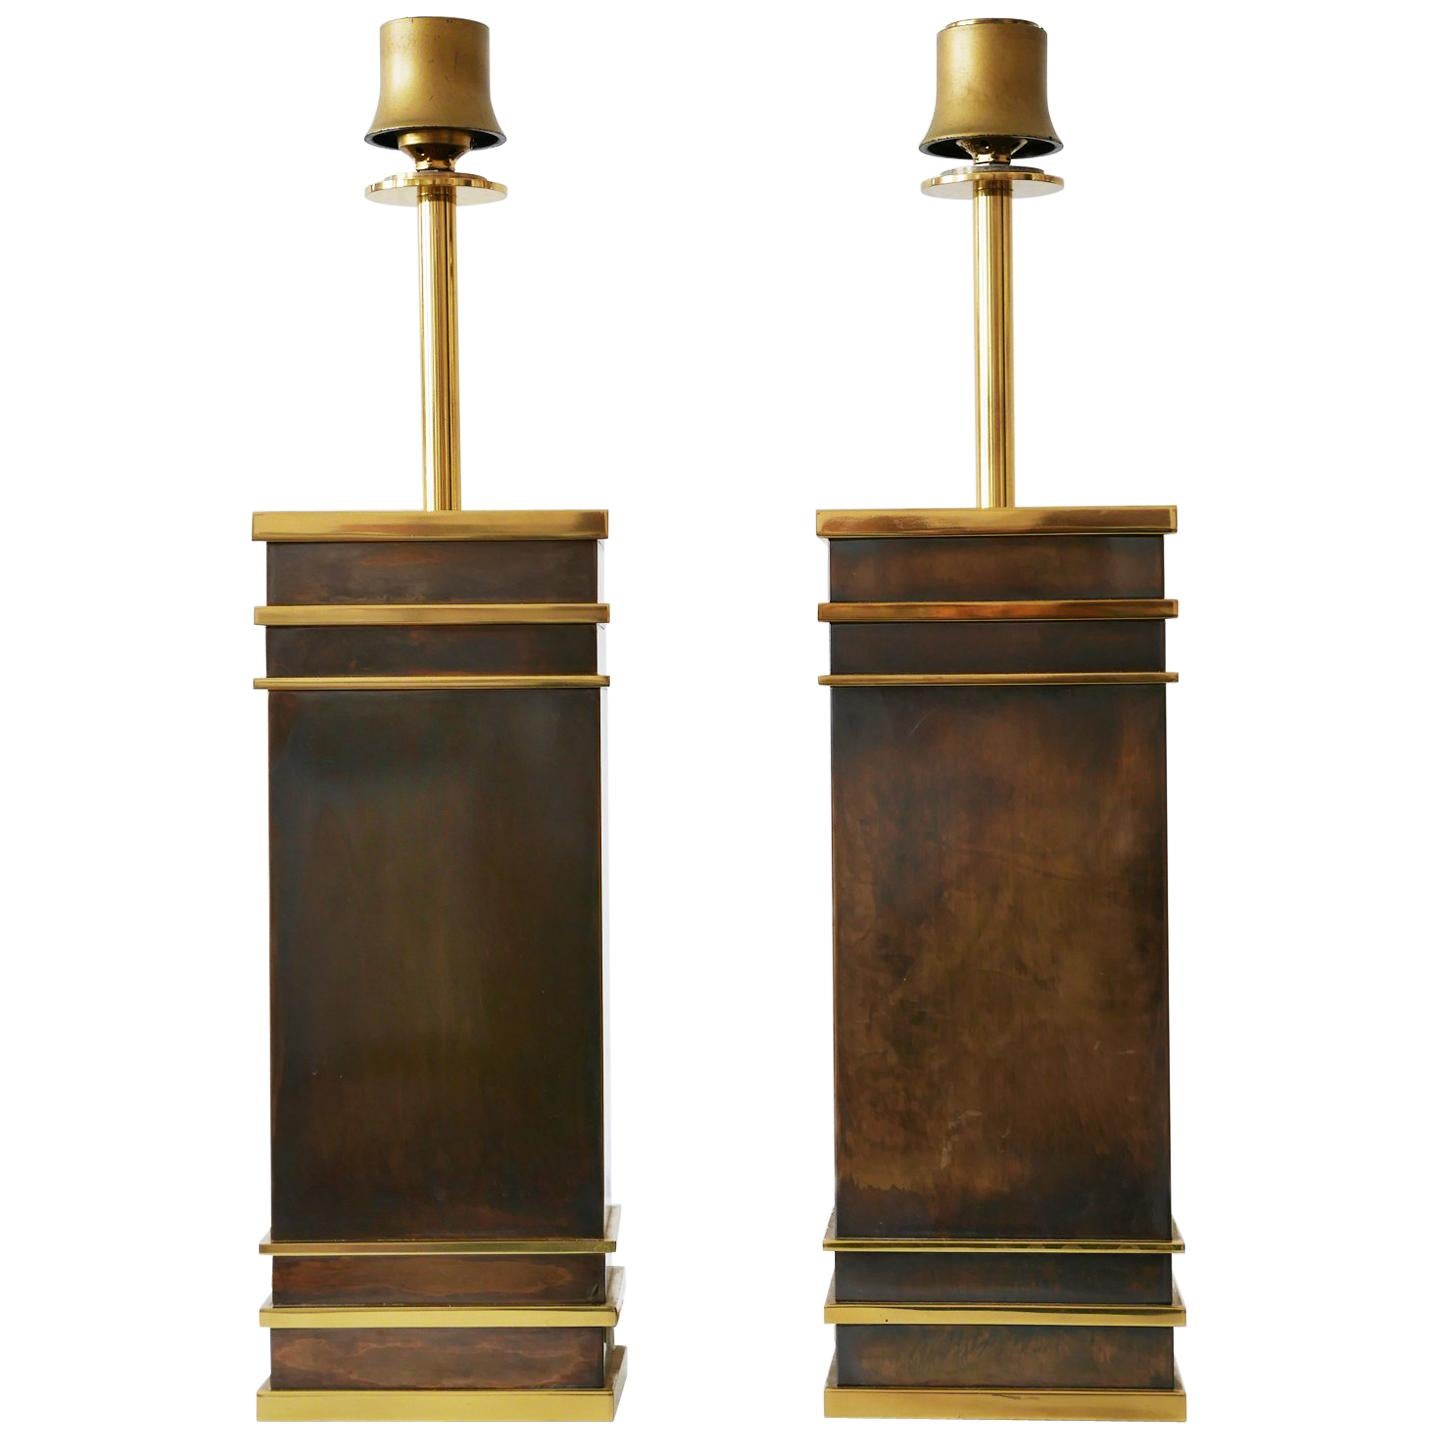 Set of Two Monumental Midcentury Table Lamps by Vereinigte Werkstätten, Germany